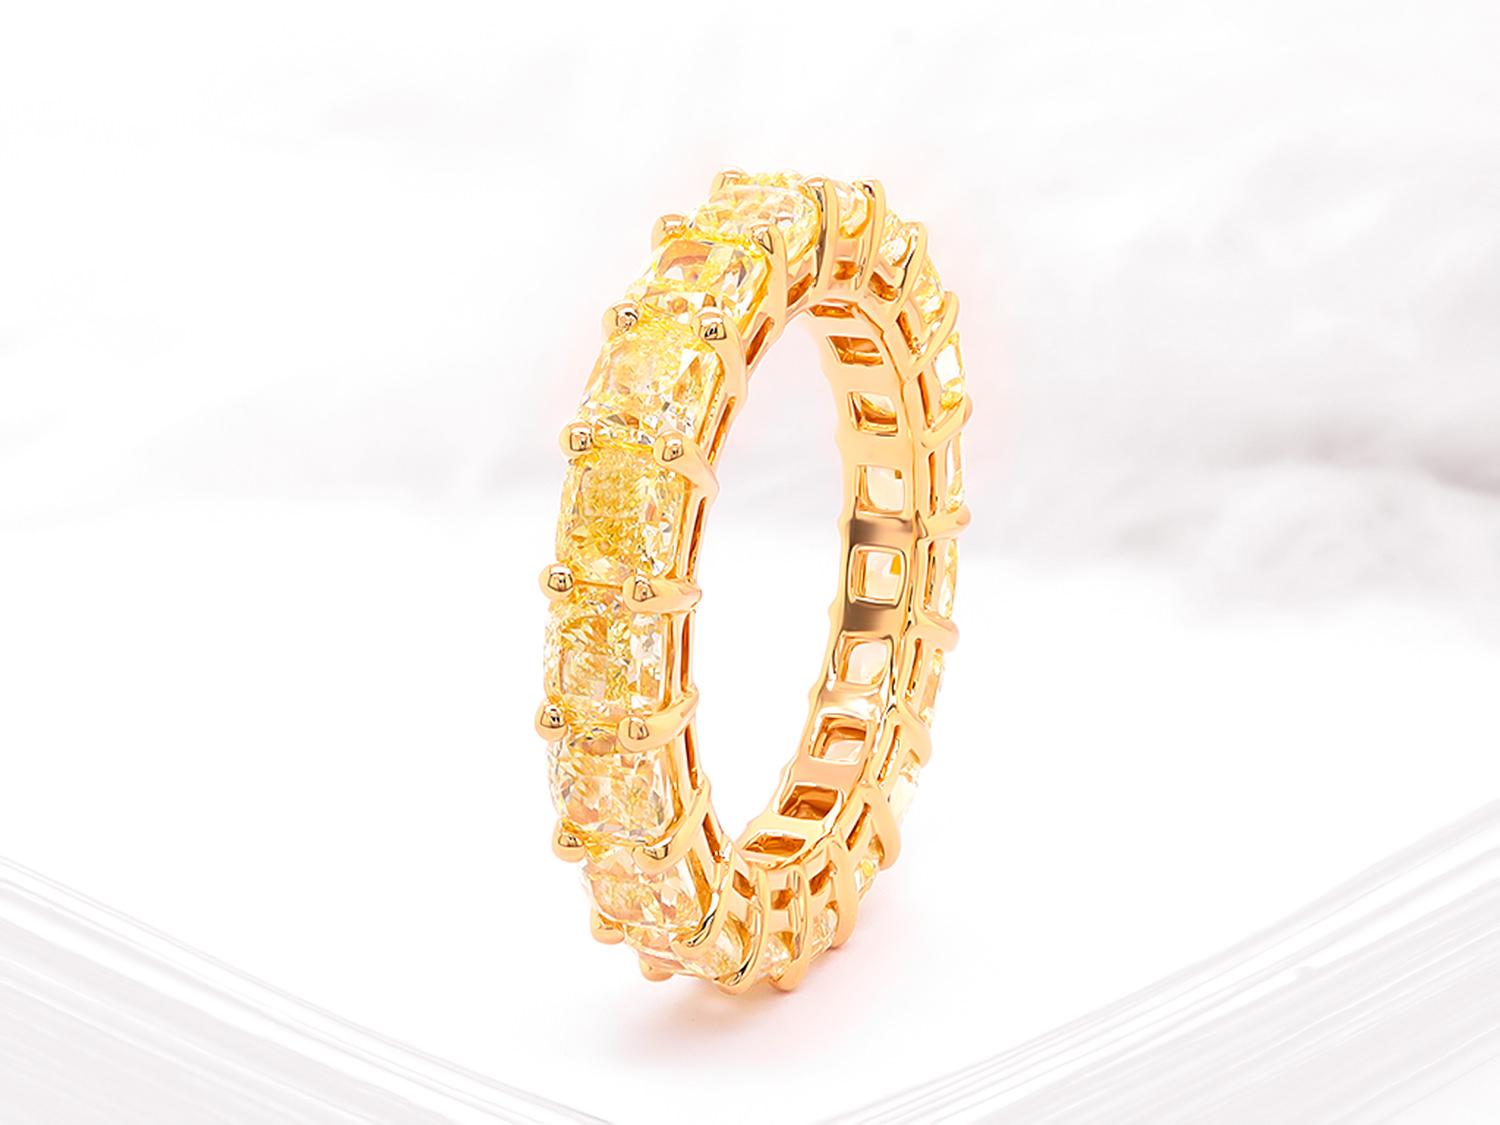 Fancy Yellow Diamond Eternity Band Ring 6.32 Carats 18K Yellow Gold In Excellent Condition For Sale In Laguna Niguel, CA